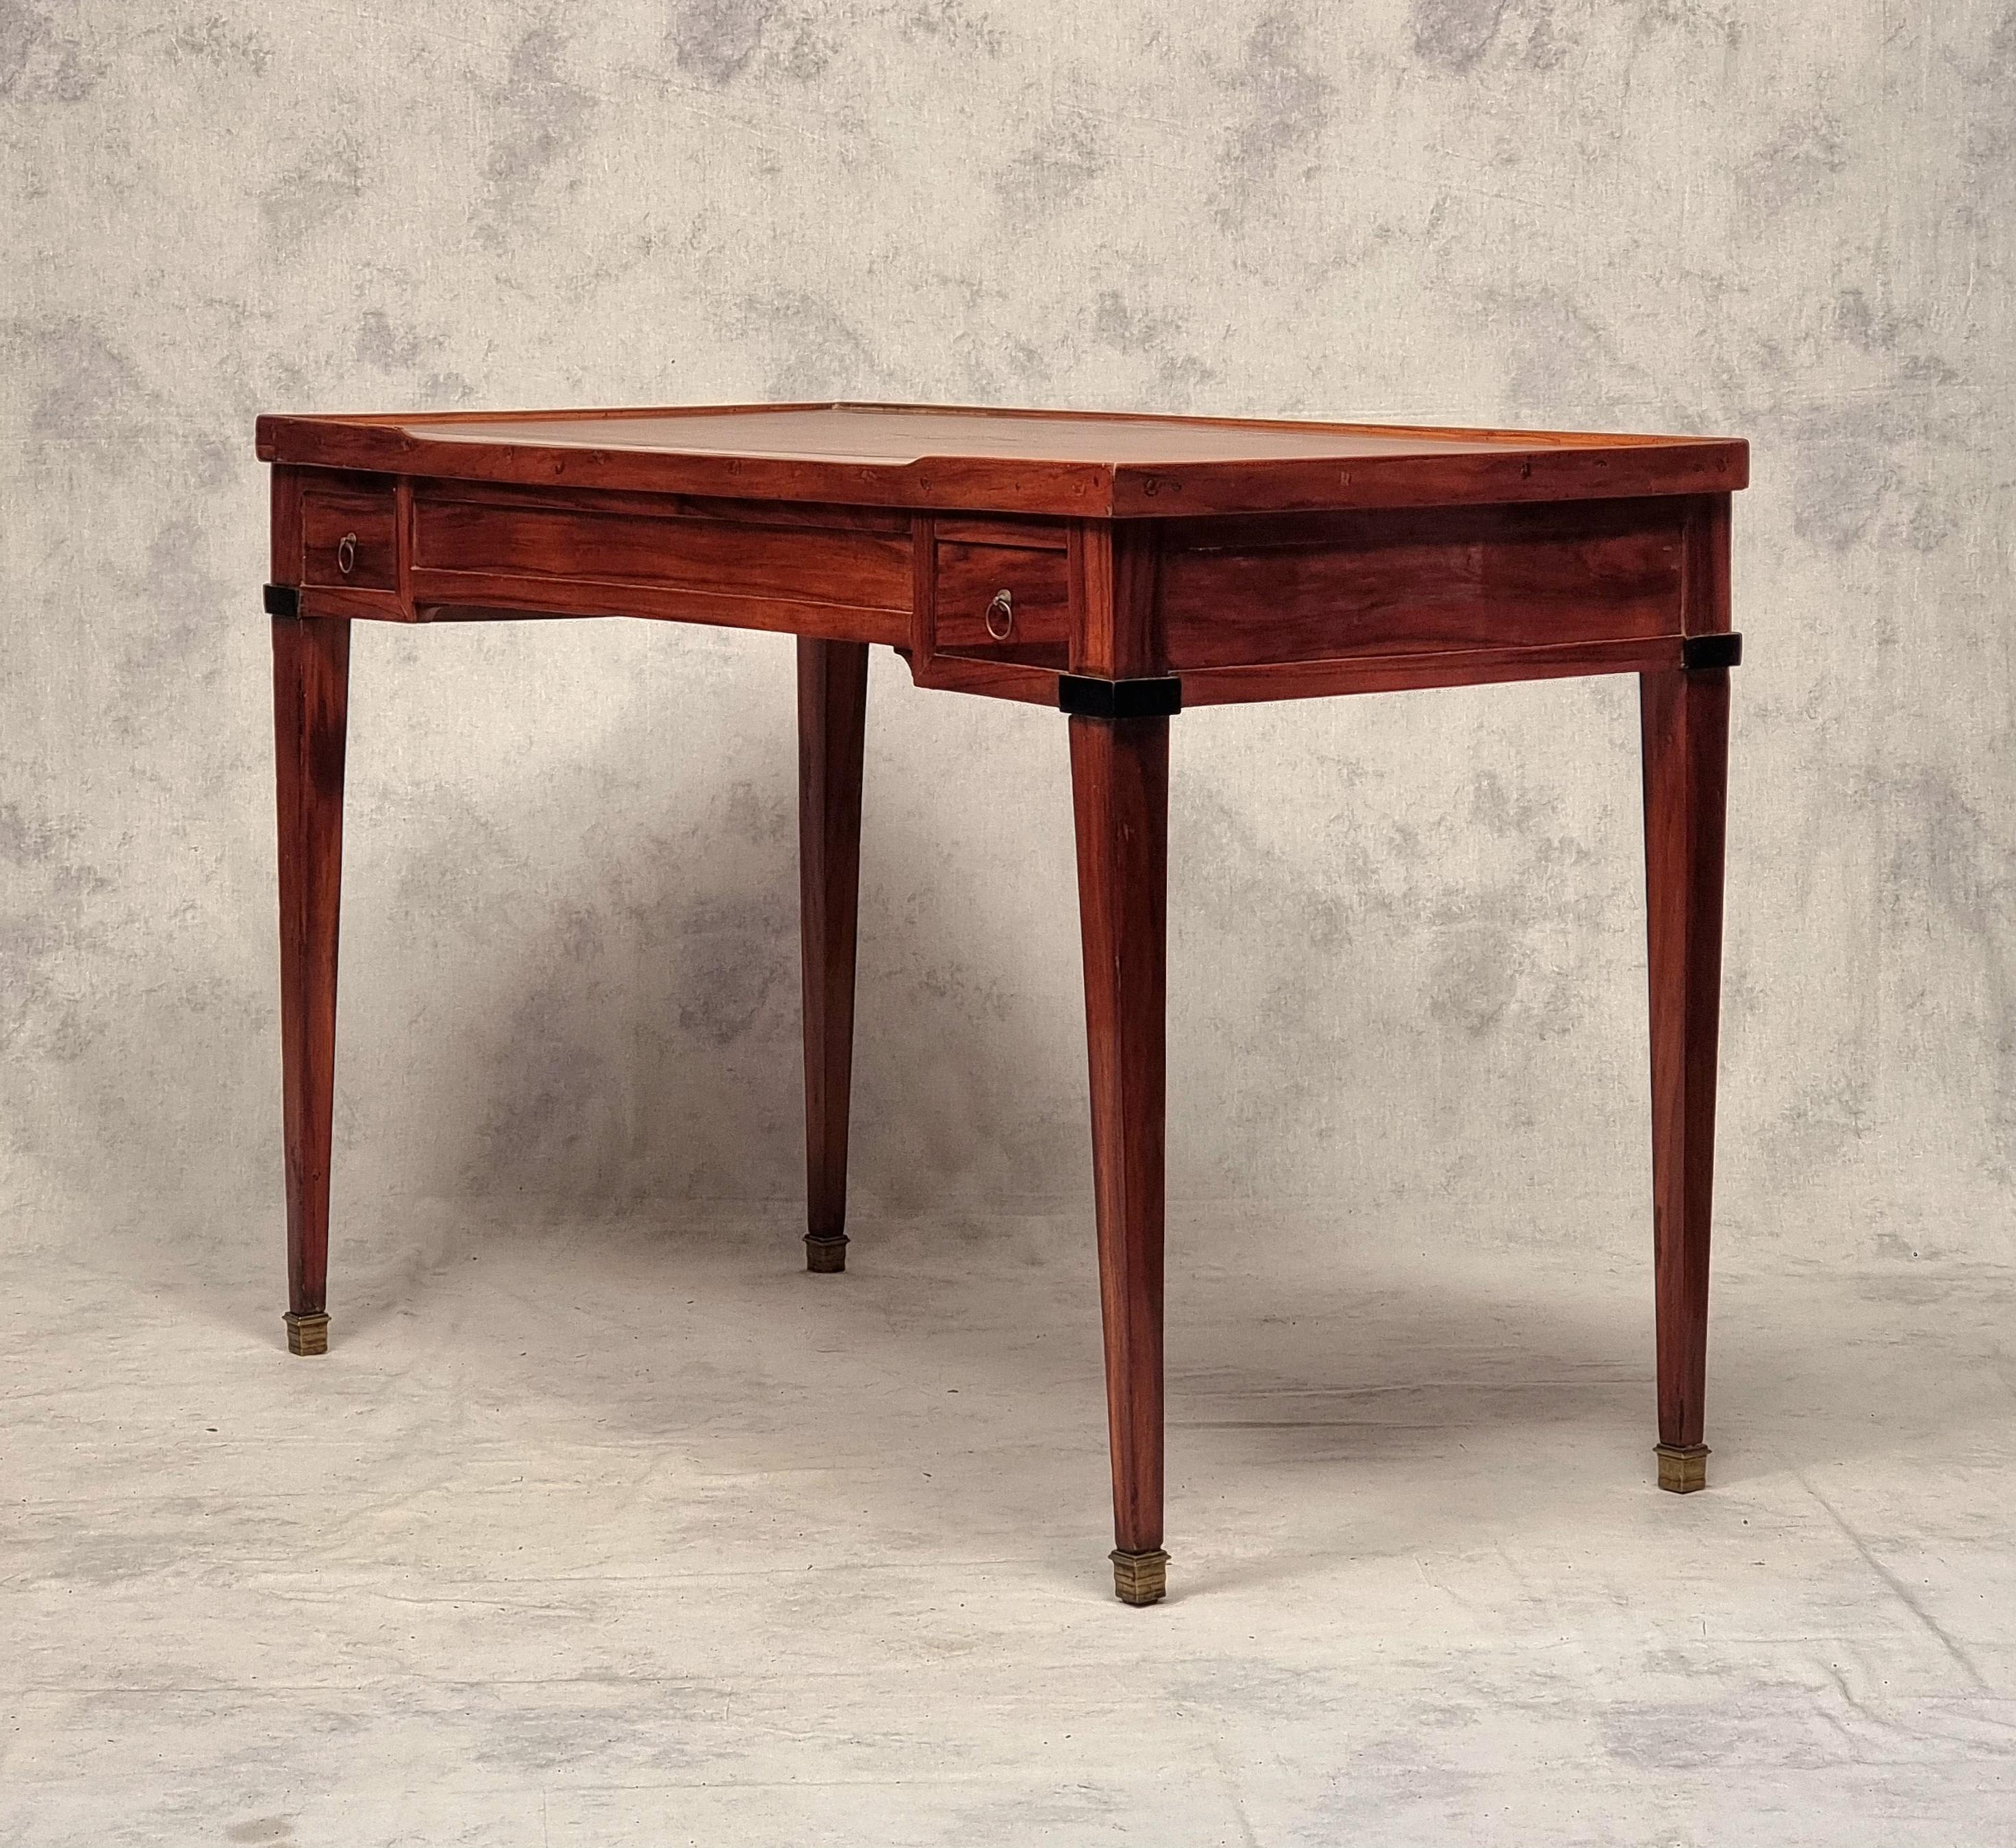 Late 18th Century Directoire Period Games Table - Rosewood & Ebony - 18th For Sale